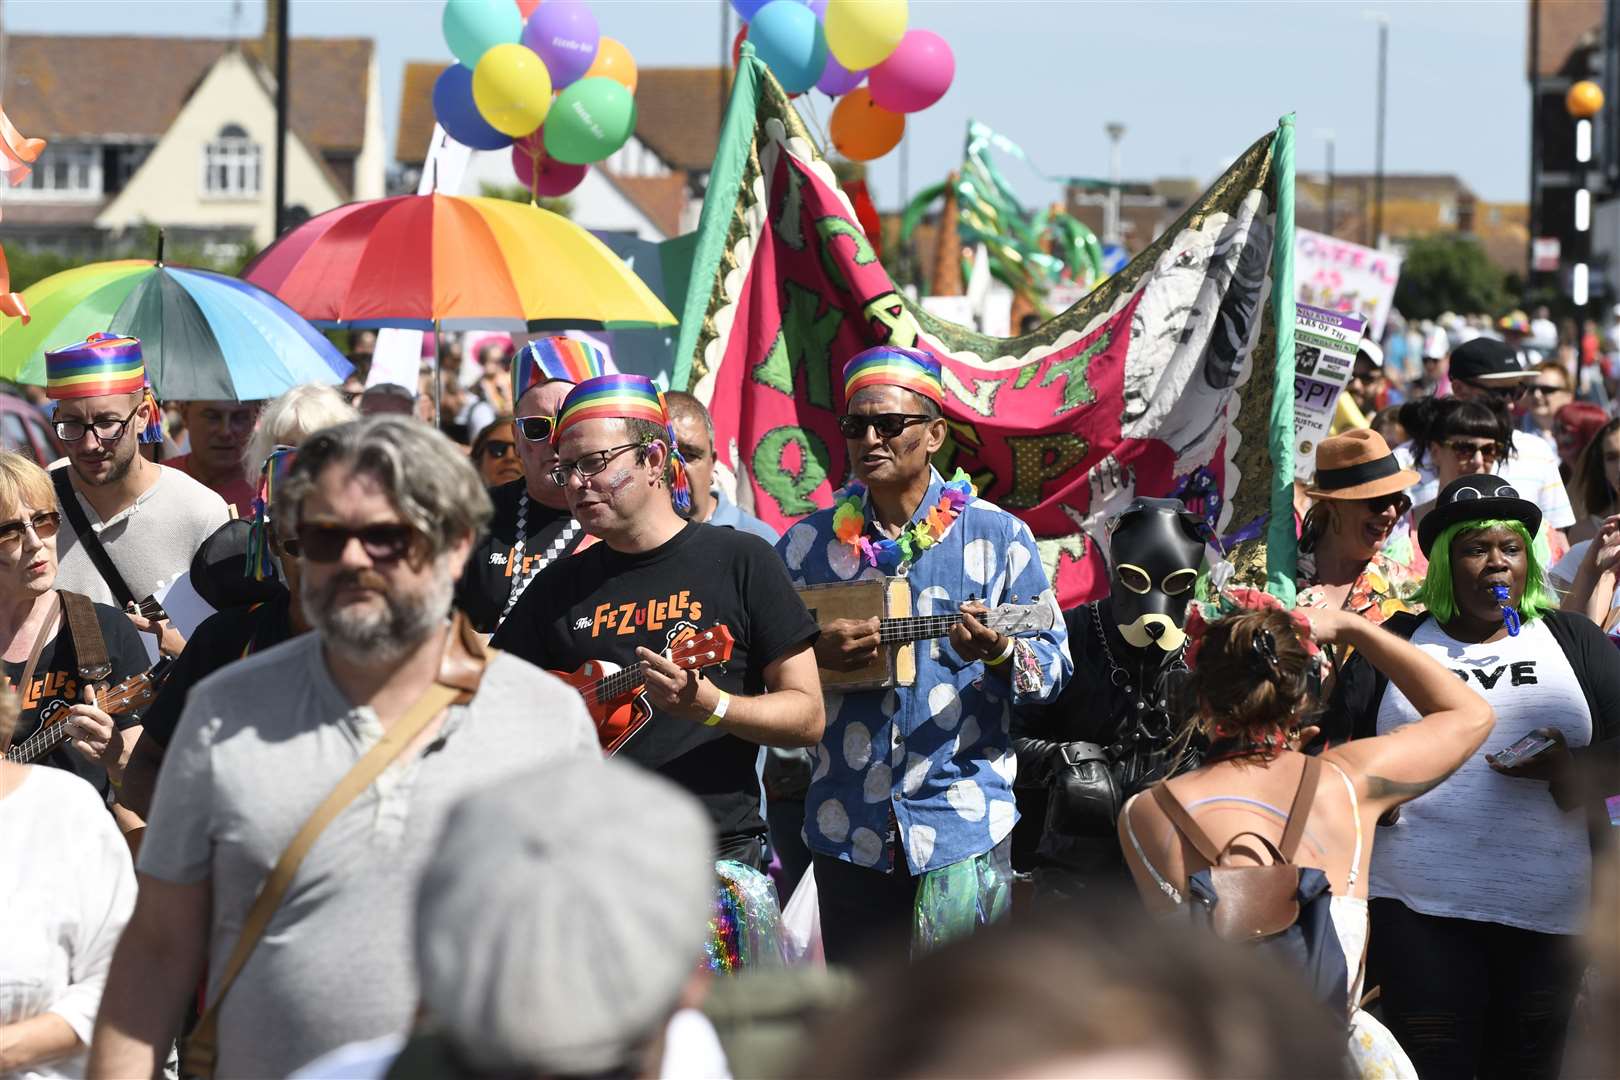 Margate Pride parade is set to go ahead as planned